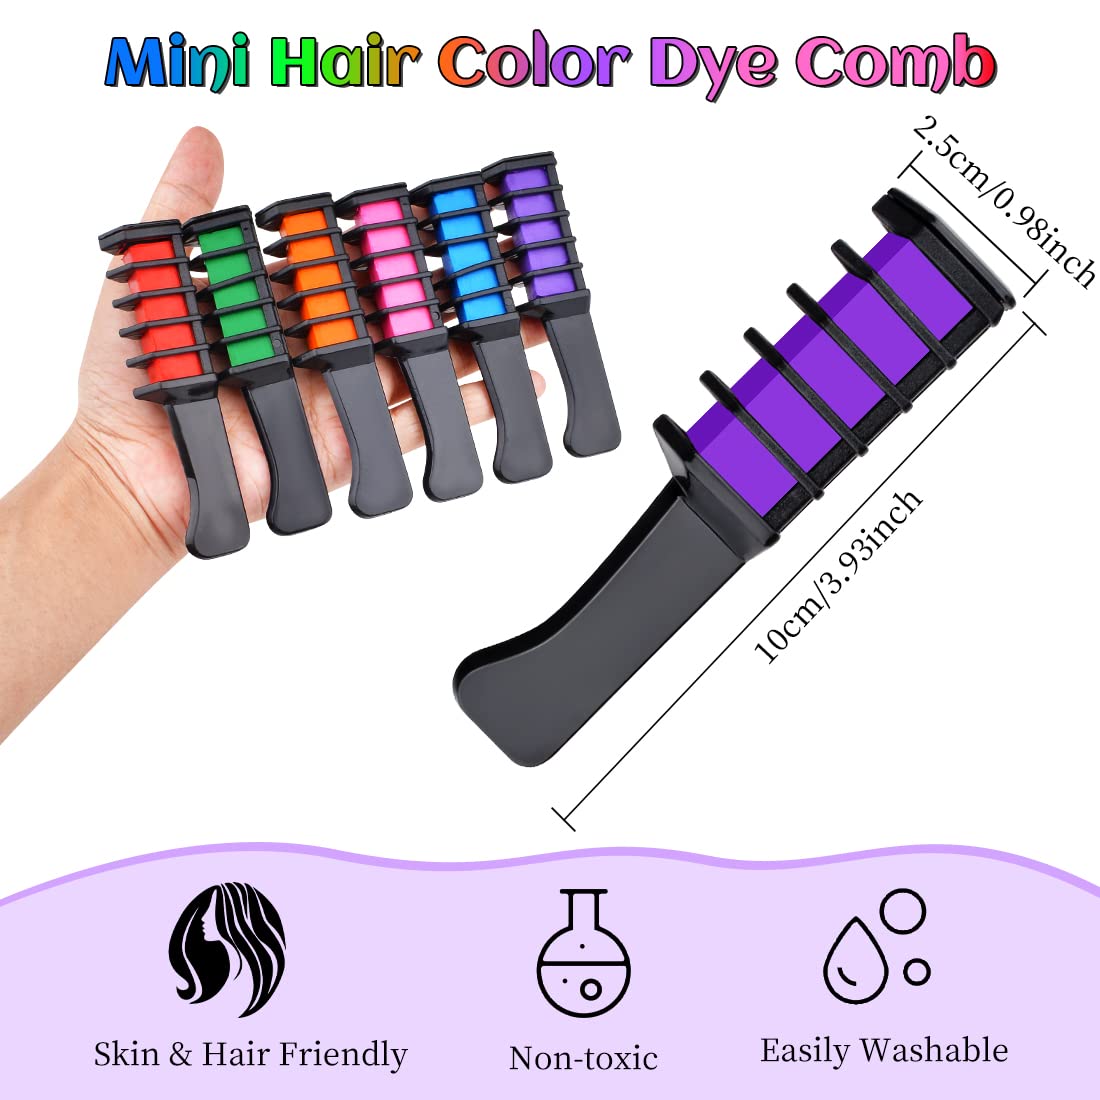 Hair Chalk for Girls,Temporary Hair Color for Kids,Makeup Sets Stocking Stuffers for Kids Teens,Christmas Gifts Toys for Girls,Washable Hair Chalk Comb,Non-toxic Hair Dye,Color Hair Spray - image 1 of 5